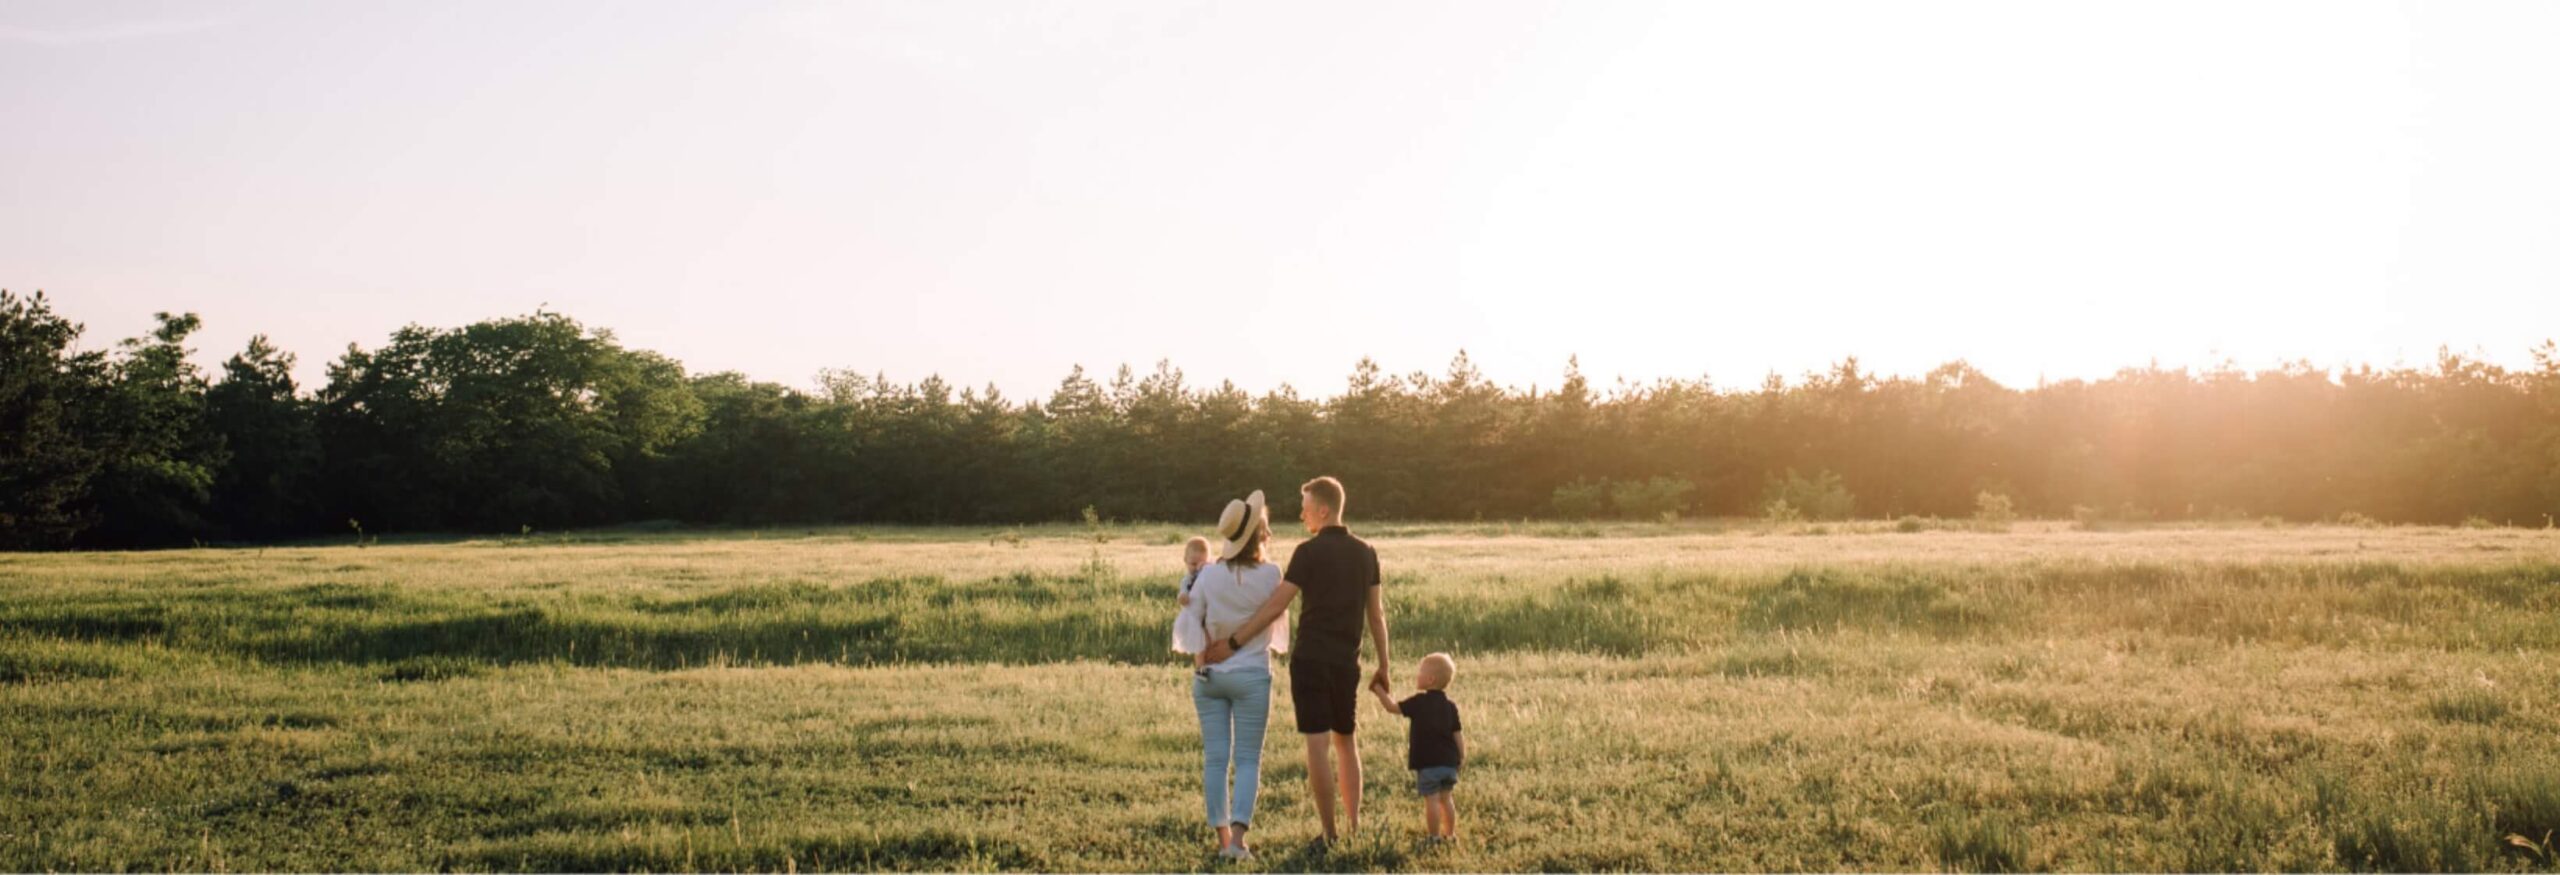 Couple with two kids holding hands in a field